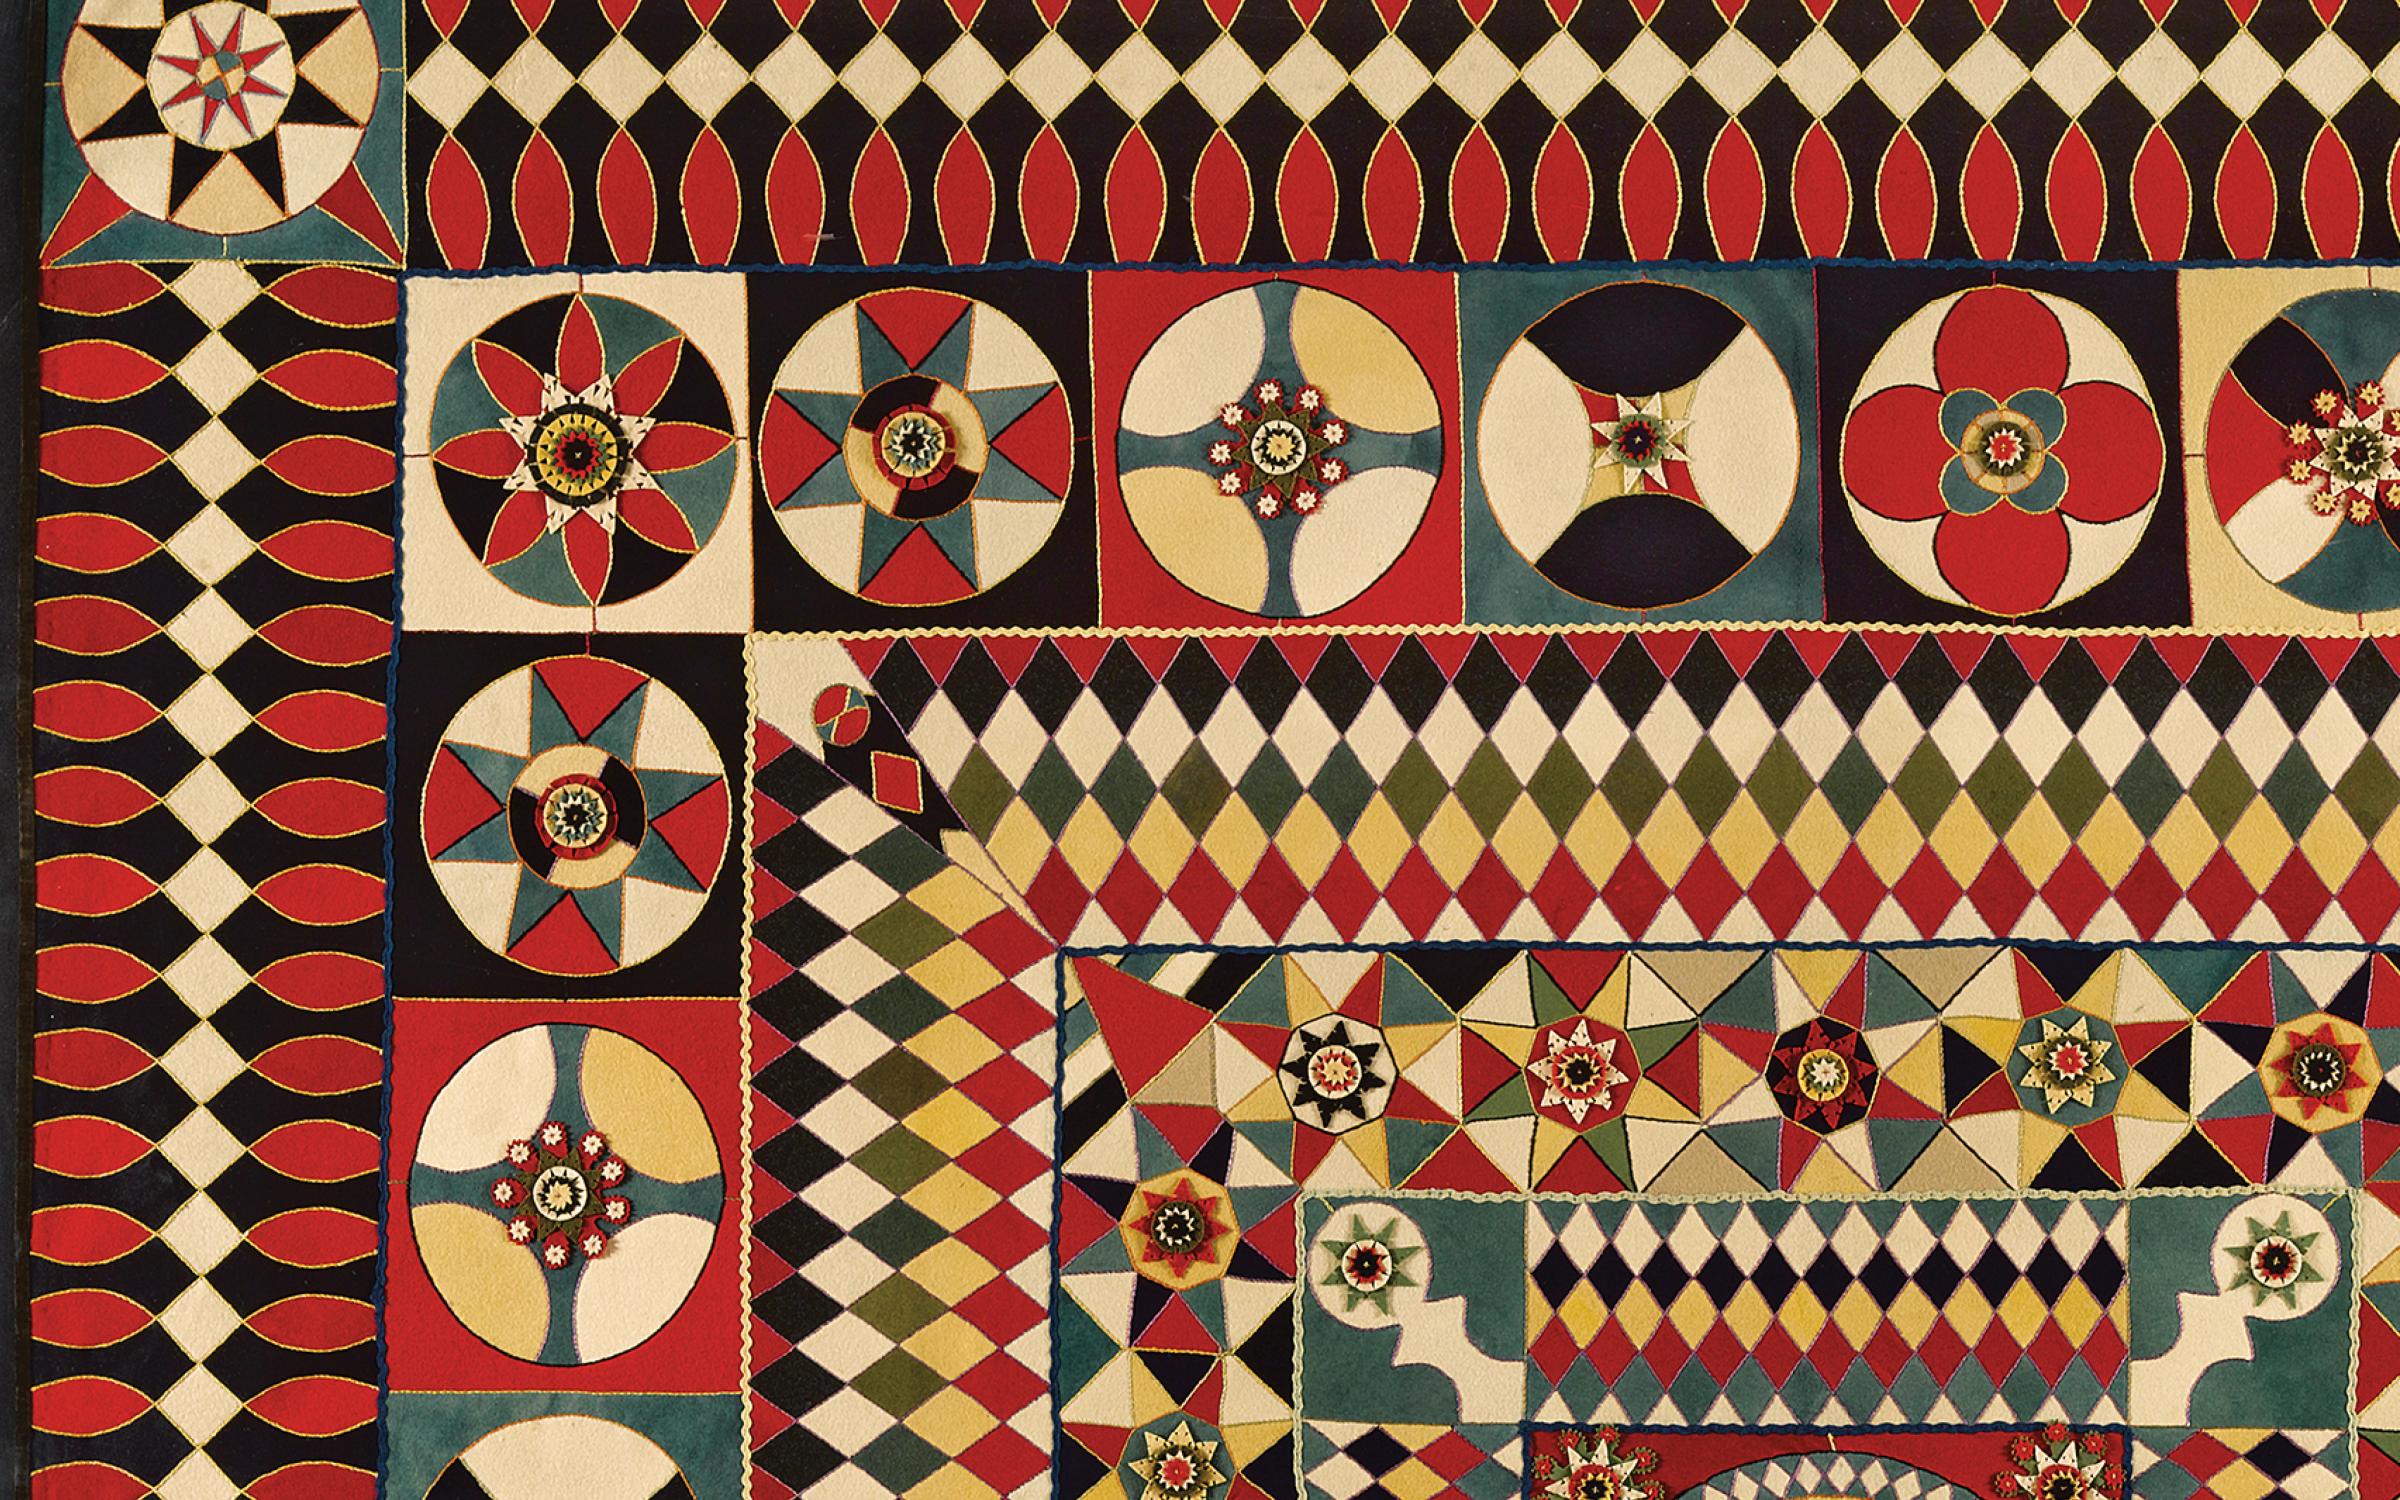 An intricate geometric shaped quilt with red, yellow, and tan.